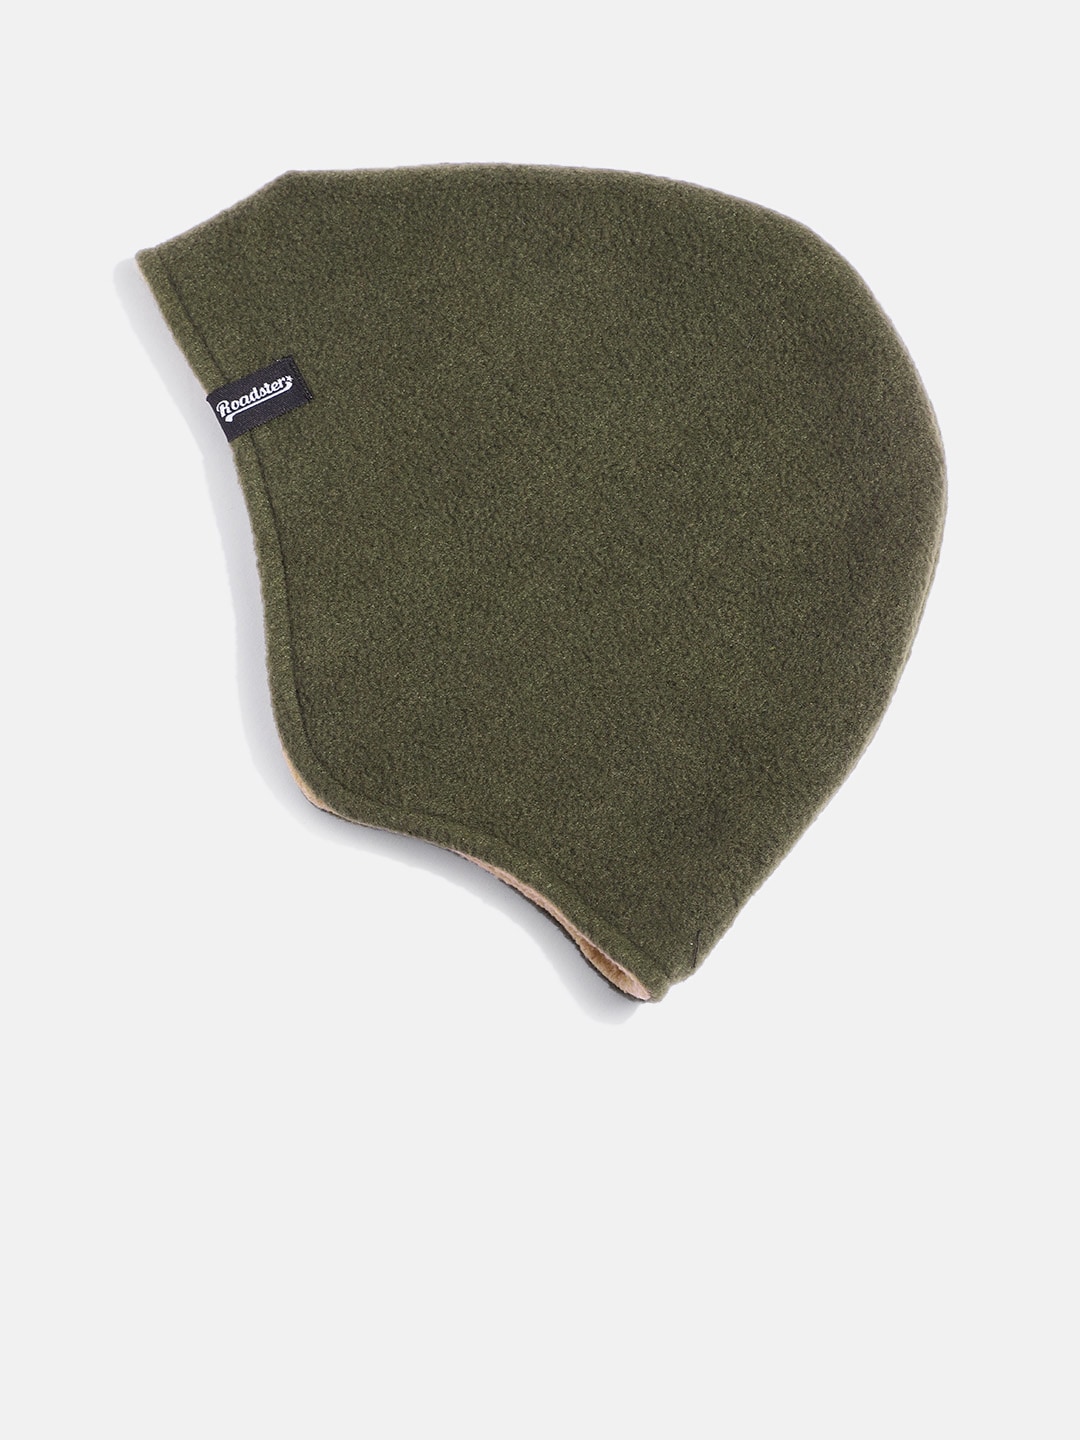 Roadster Unisex Olive Green & Beige Acrylic Reversible Beanie Price in India